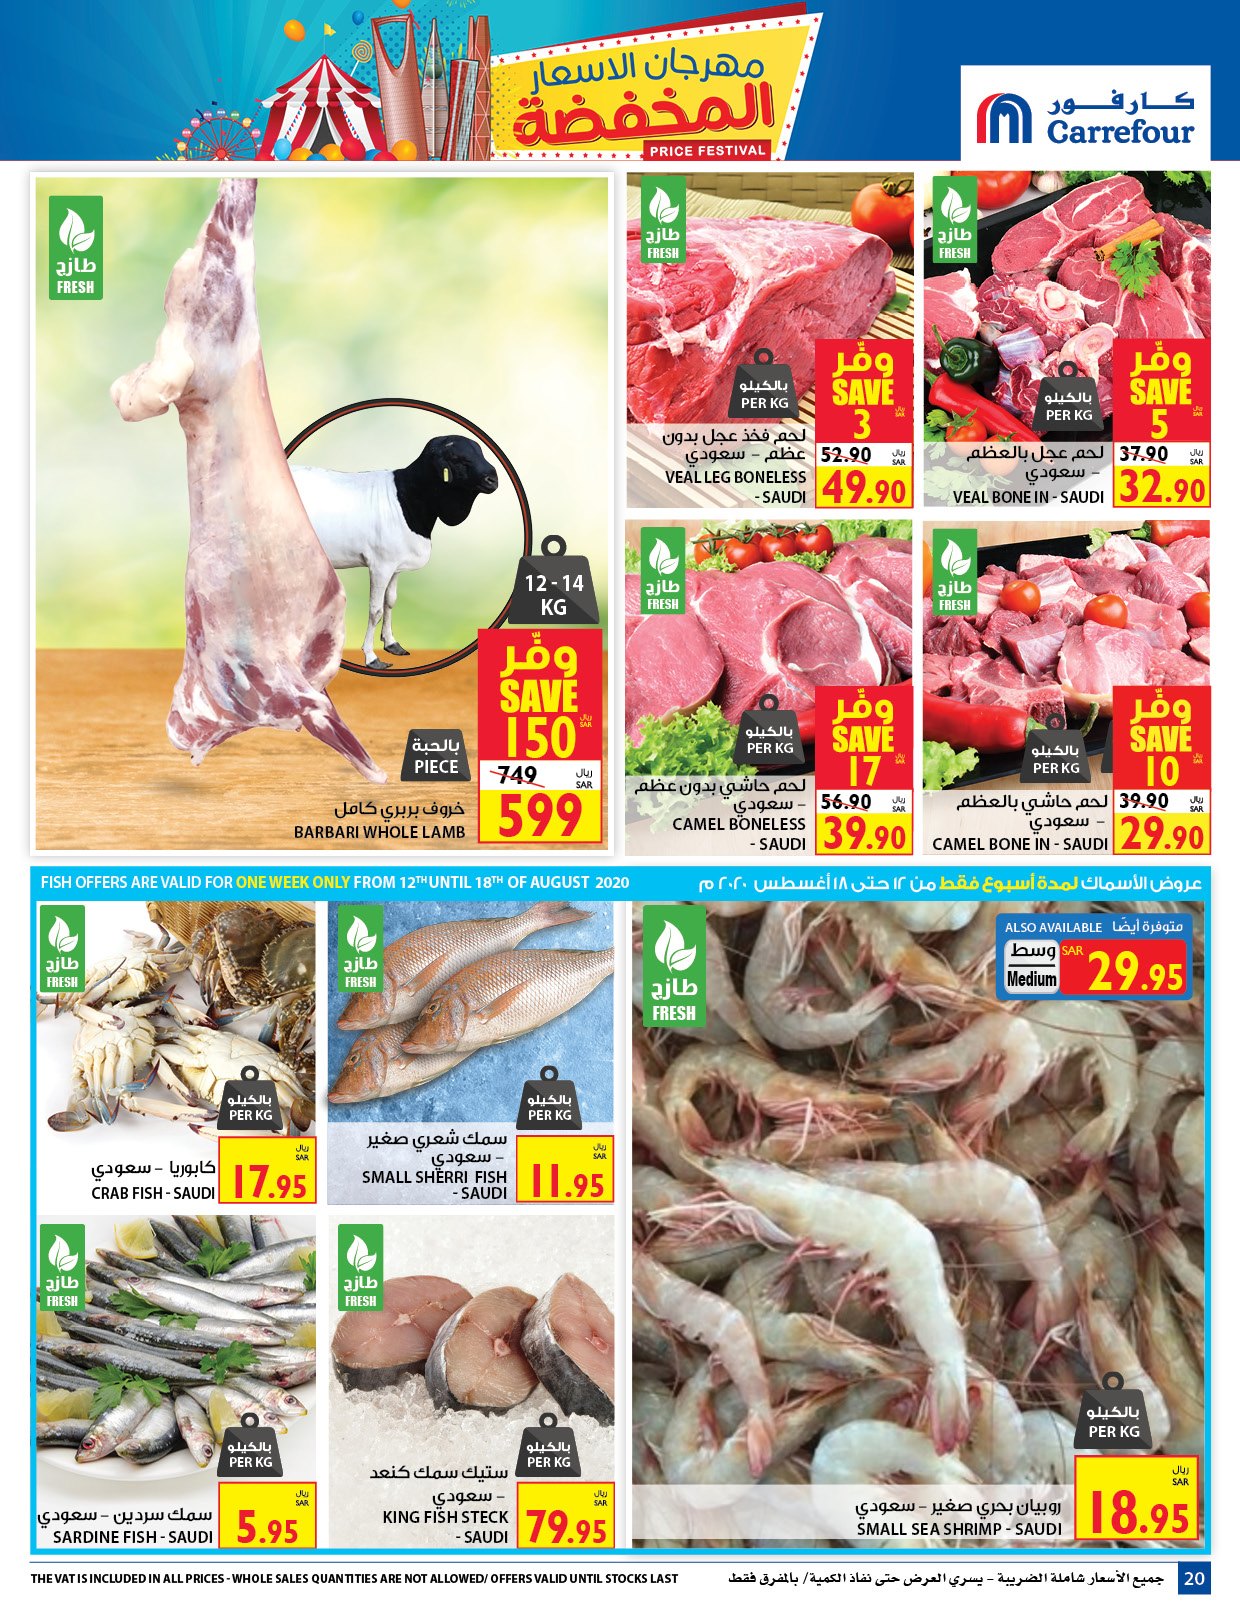 Carrefour Festival Offers from 12/8 till 25/8 | Carrefour KSA 21